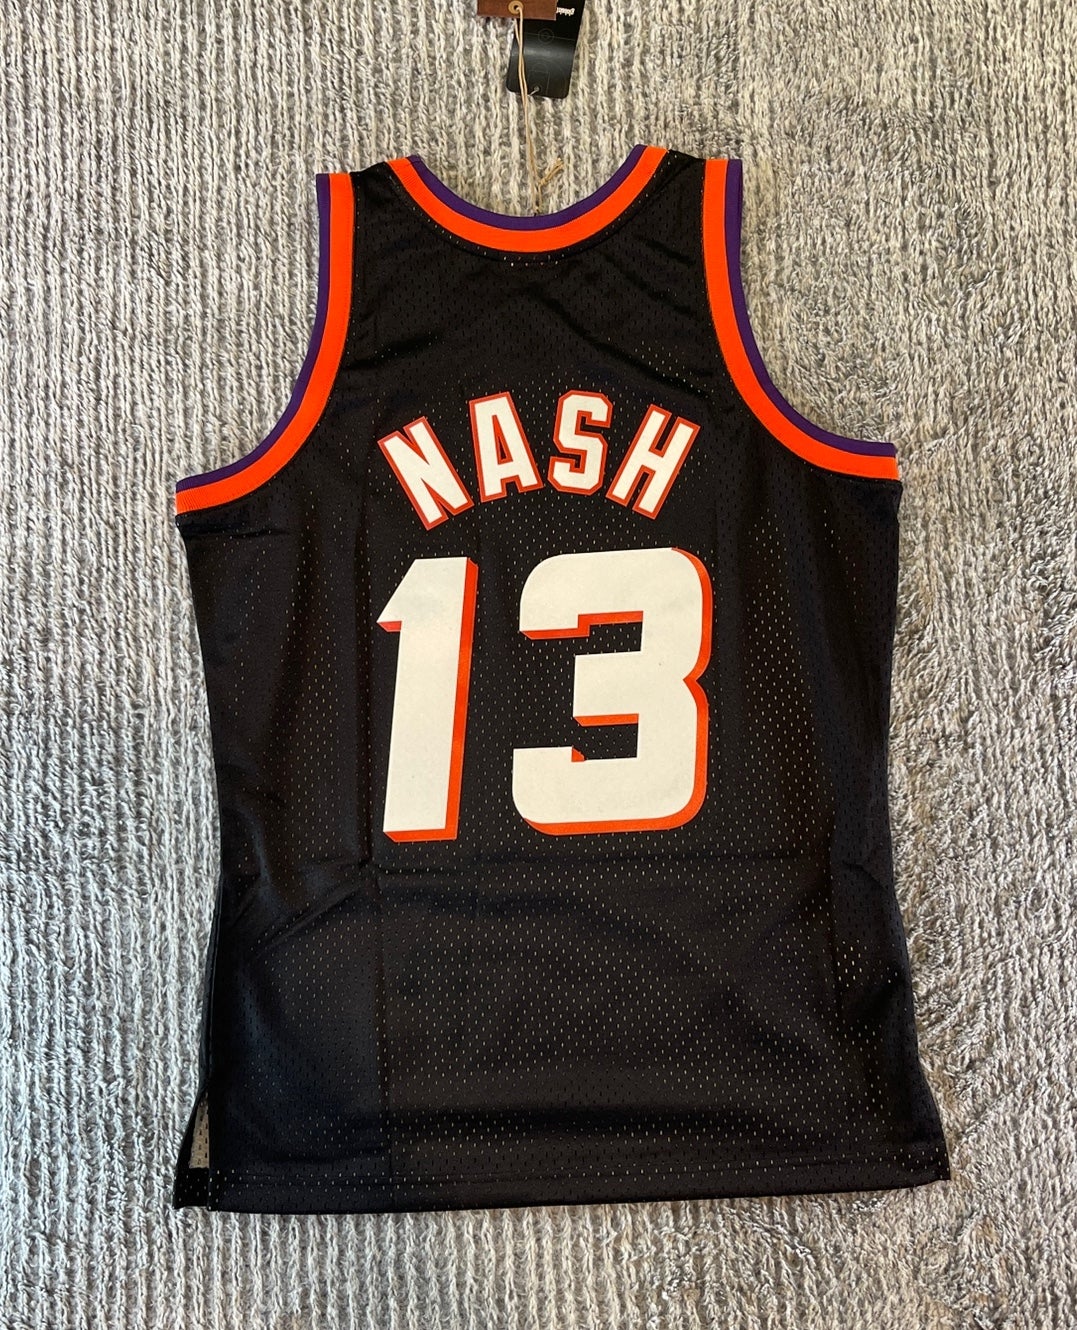 Suns Charles Barkley Mitchell And Ness Jersey Size Medium And